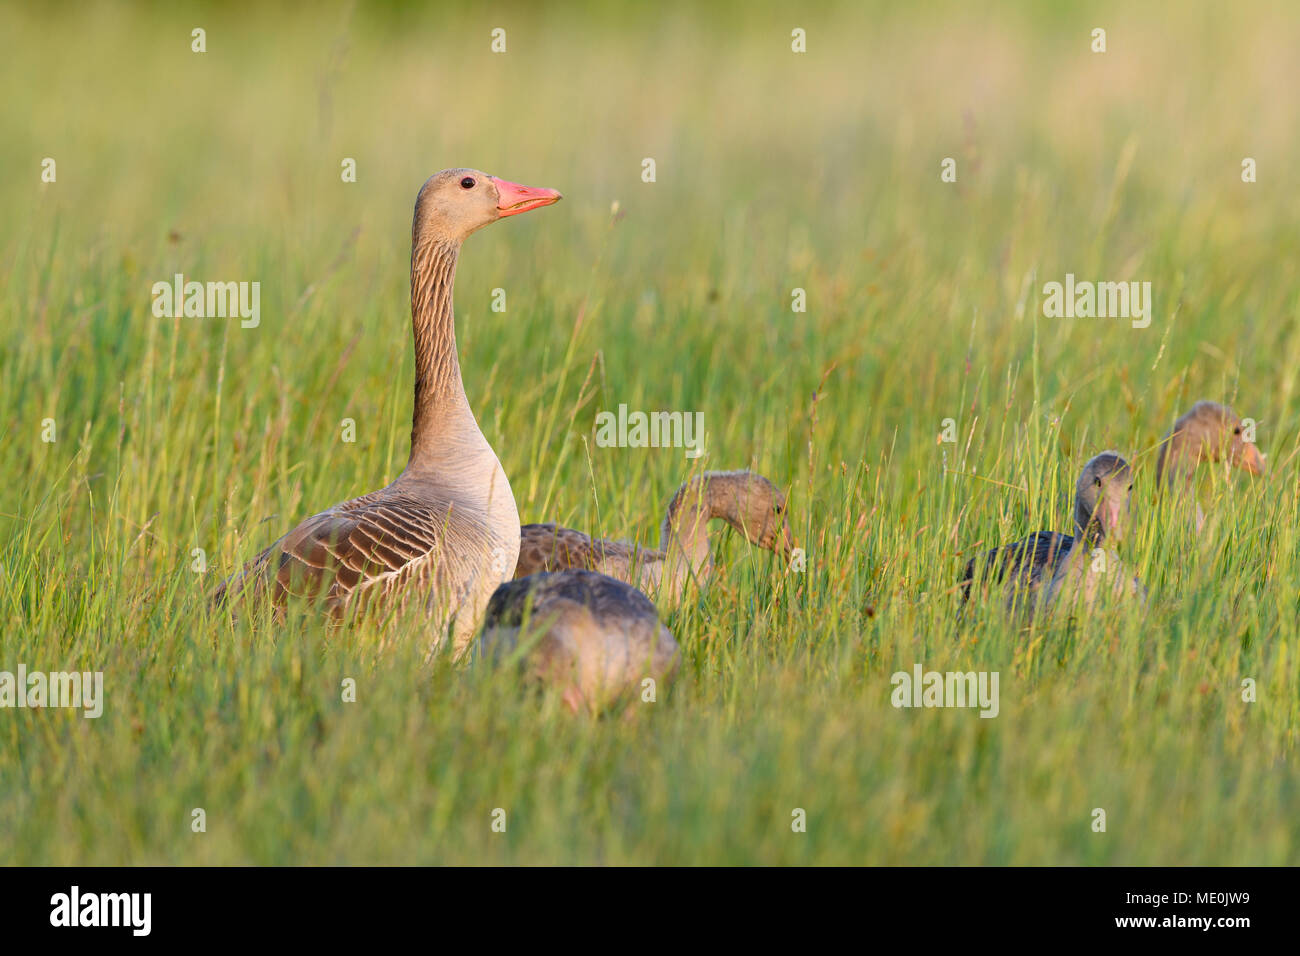 Female greylag goose (Anser anser) with her young offspring standing in a grassy field at Lake Neusiedl in Burgenland, Austria Stock Photo